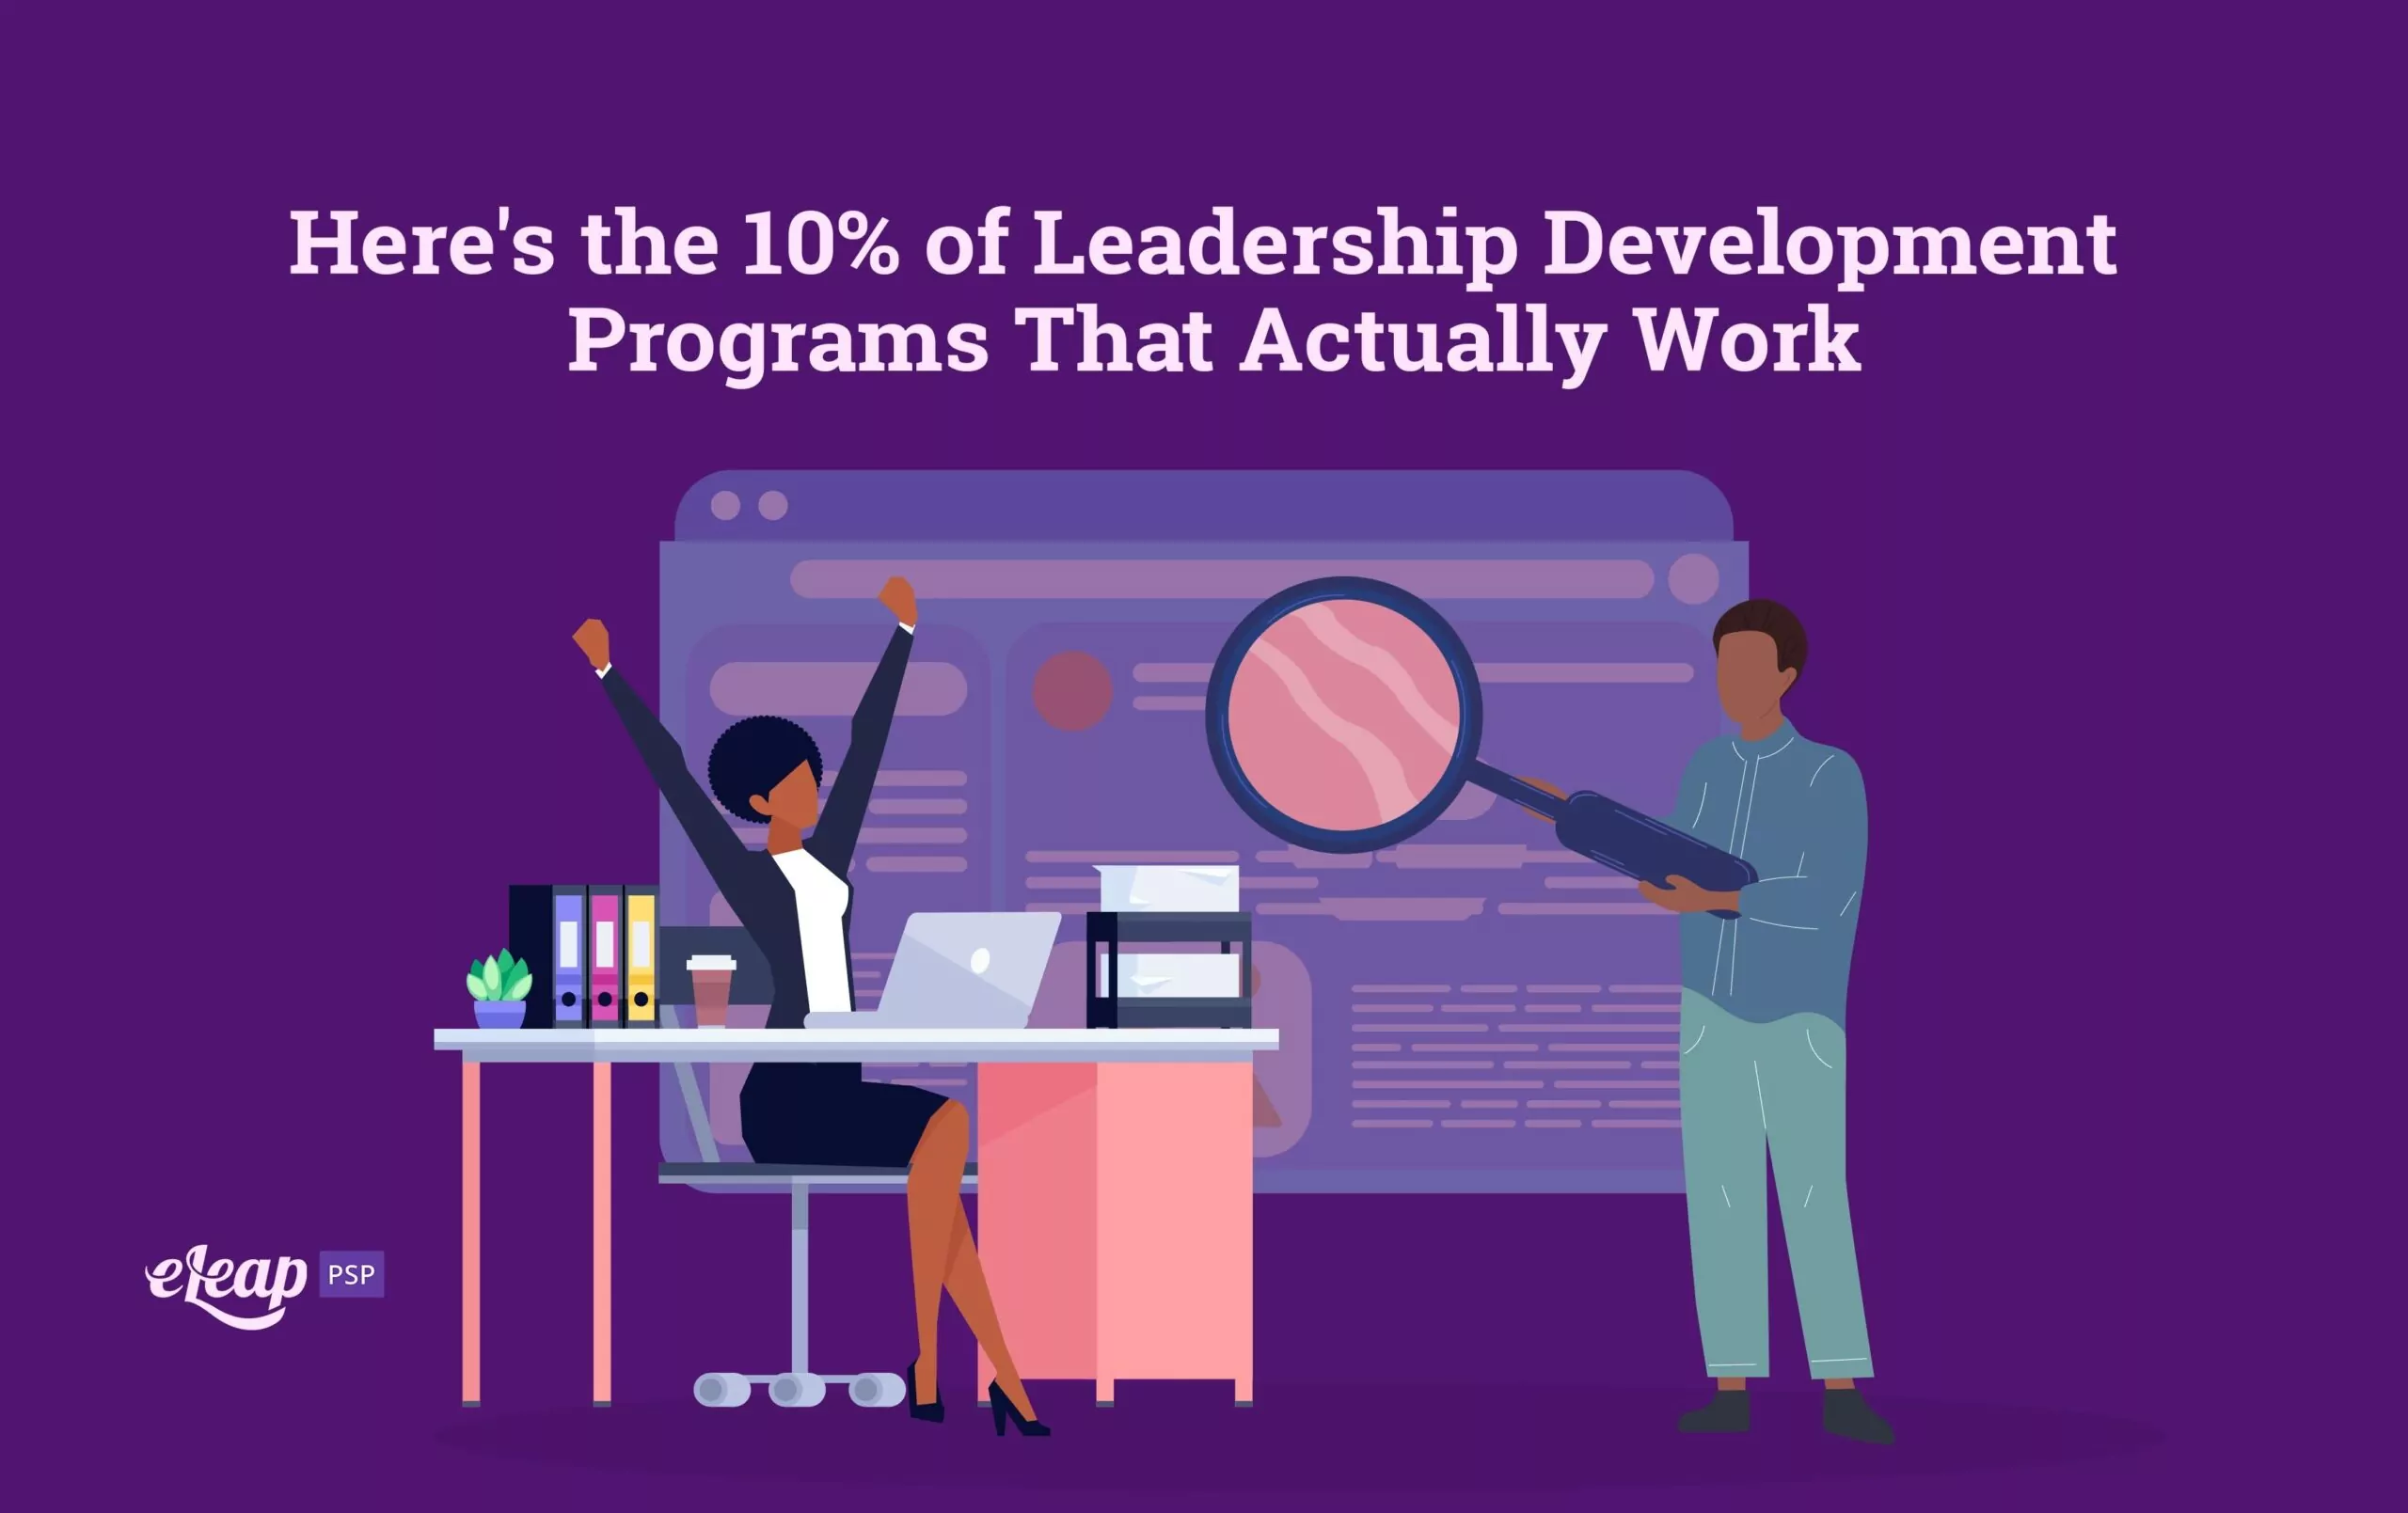 Here's the 10% of Leadership Development Programs That Actually Work